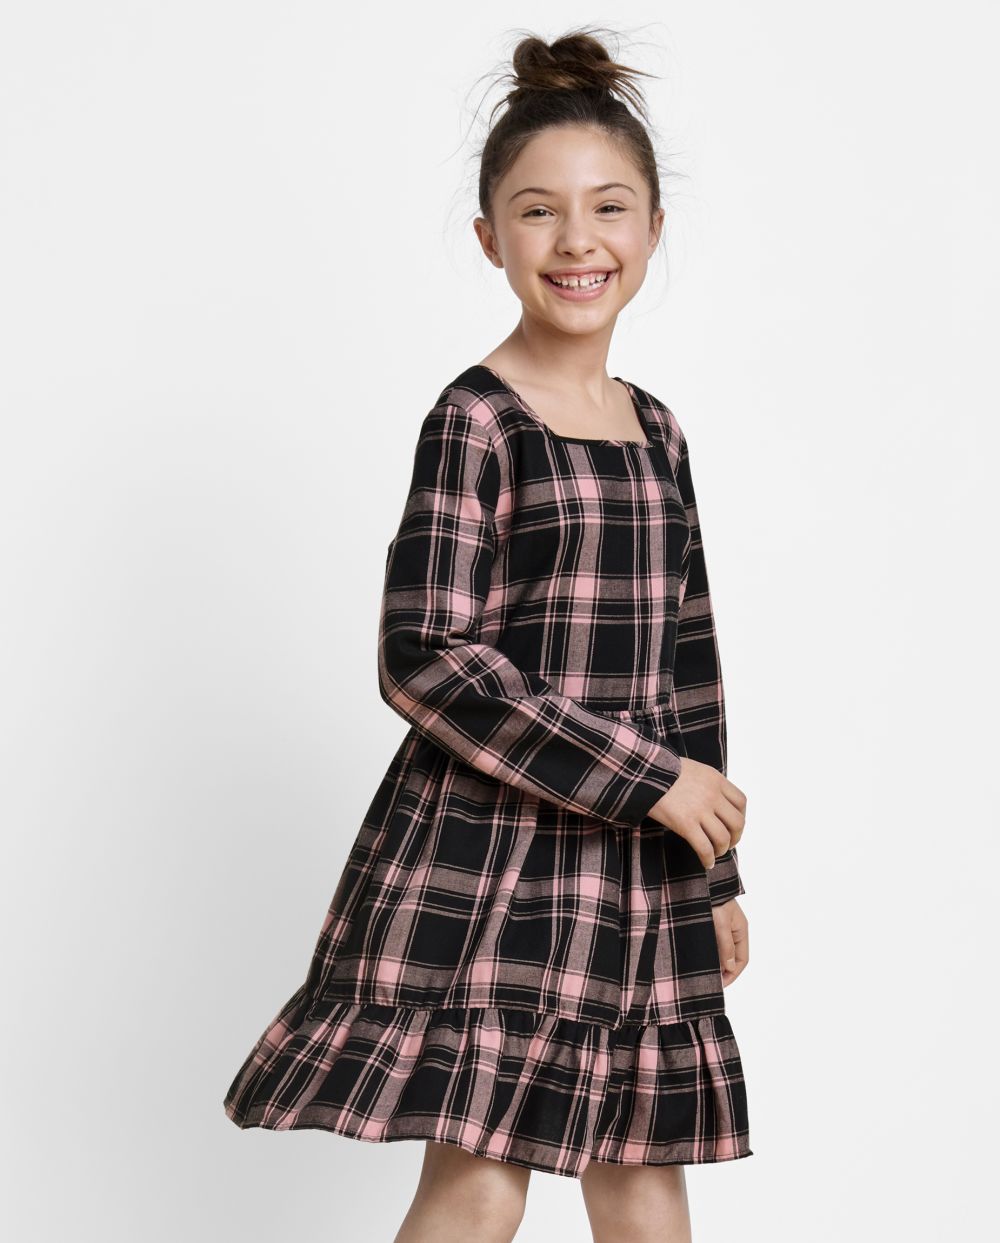 Girls Above the Knee Plaid Print Long Sleeves Tiered Square Neck Dress